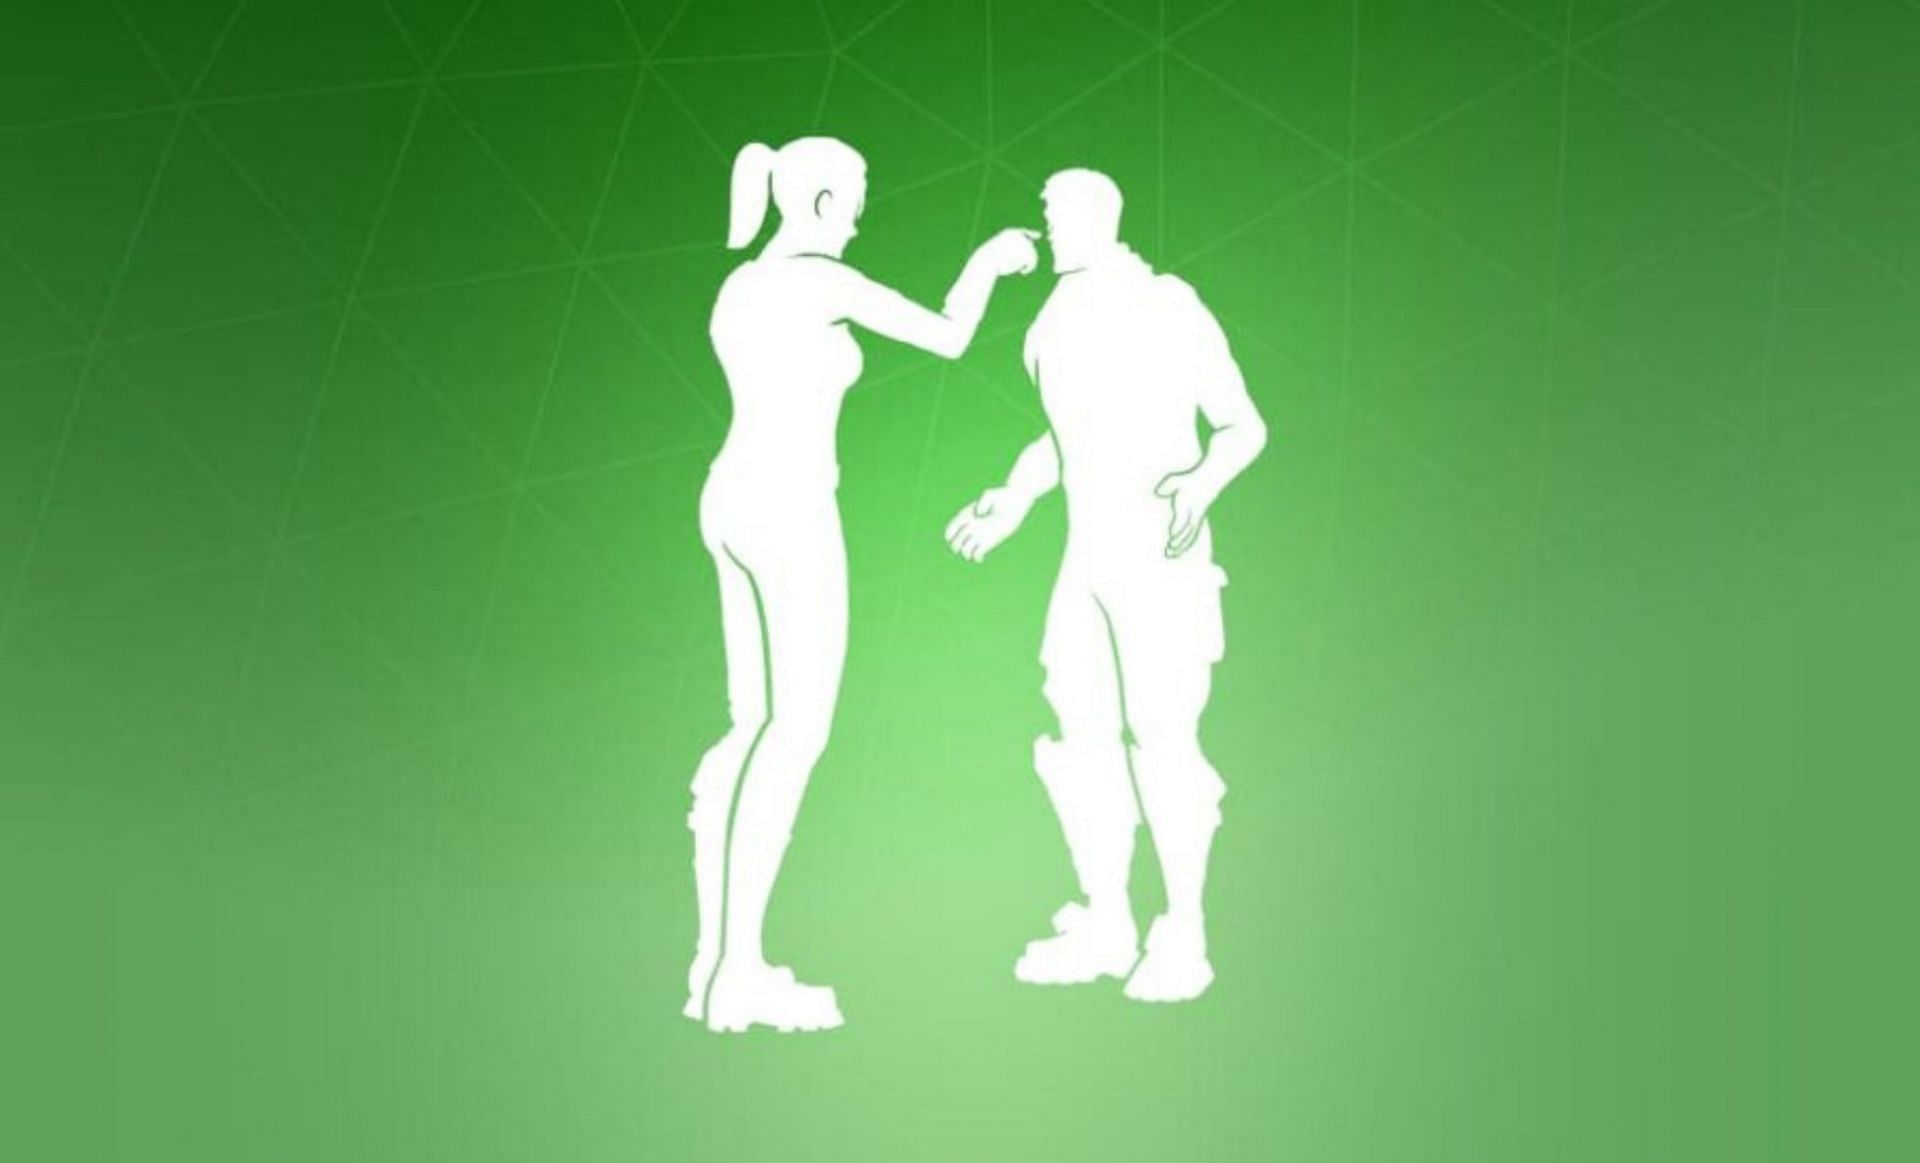 Boop emote is available in Item Shop (Image via Epic Games)